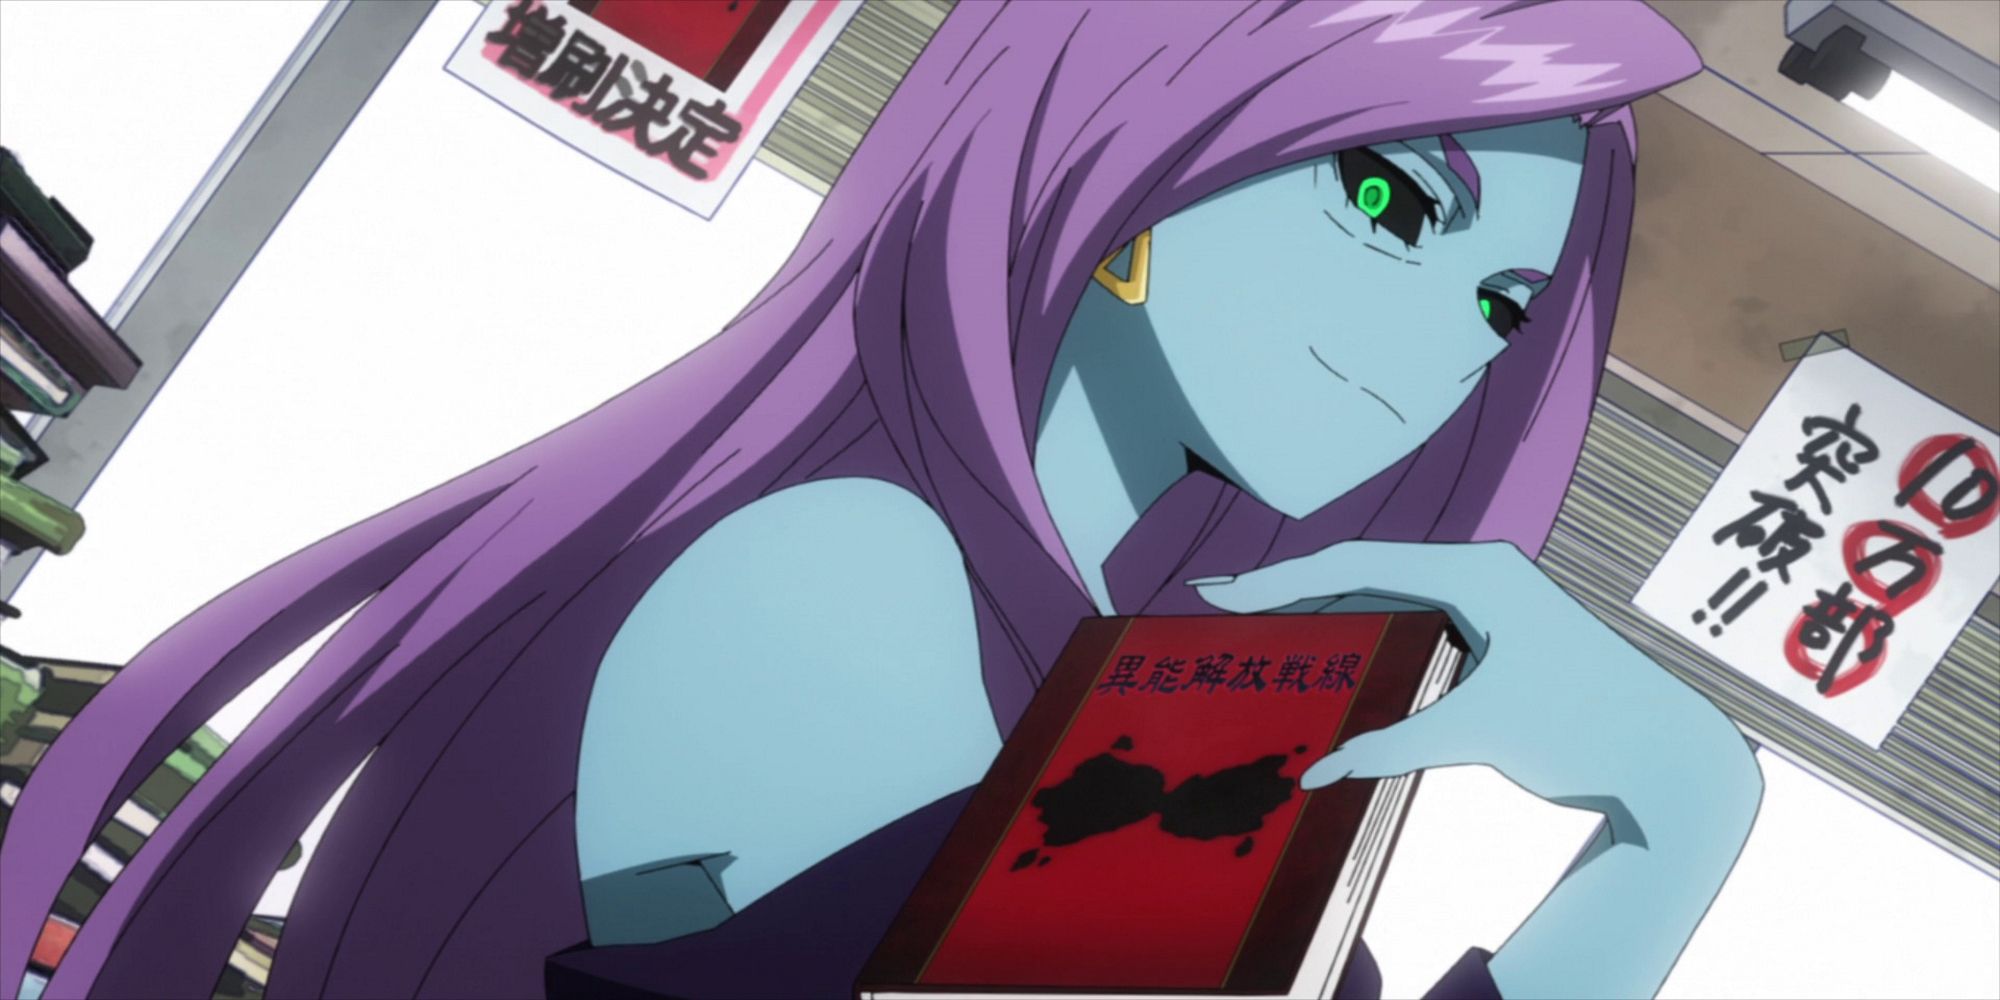 curious holding the Meta Liberation Army book in My Hero Academia. 